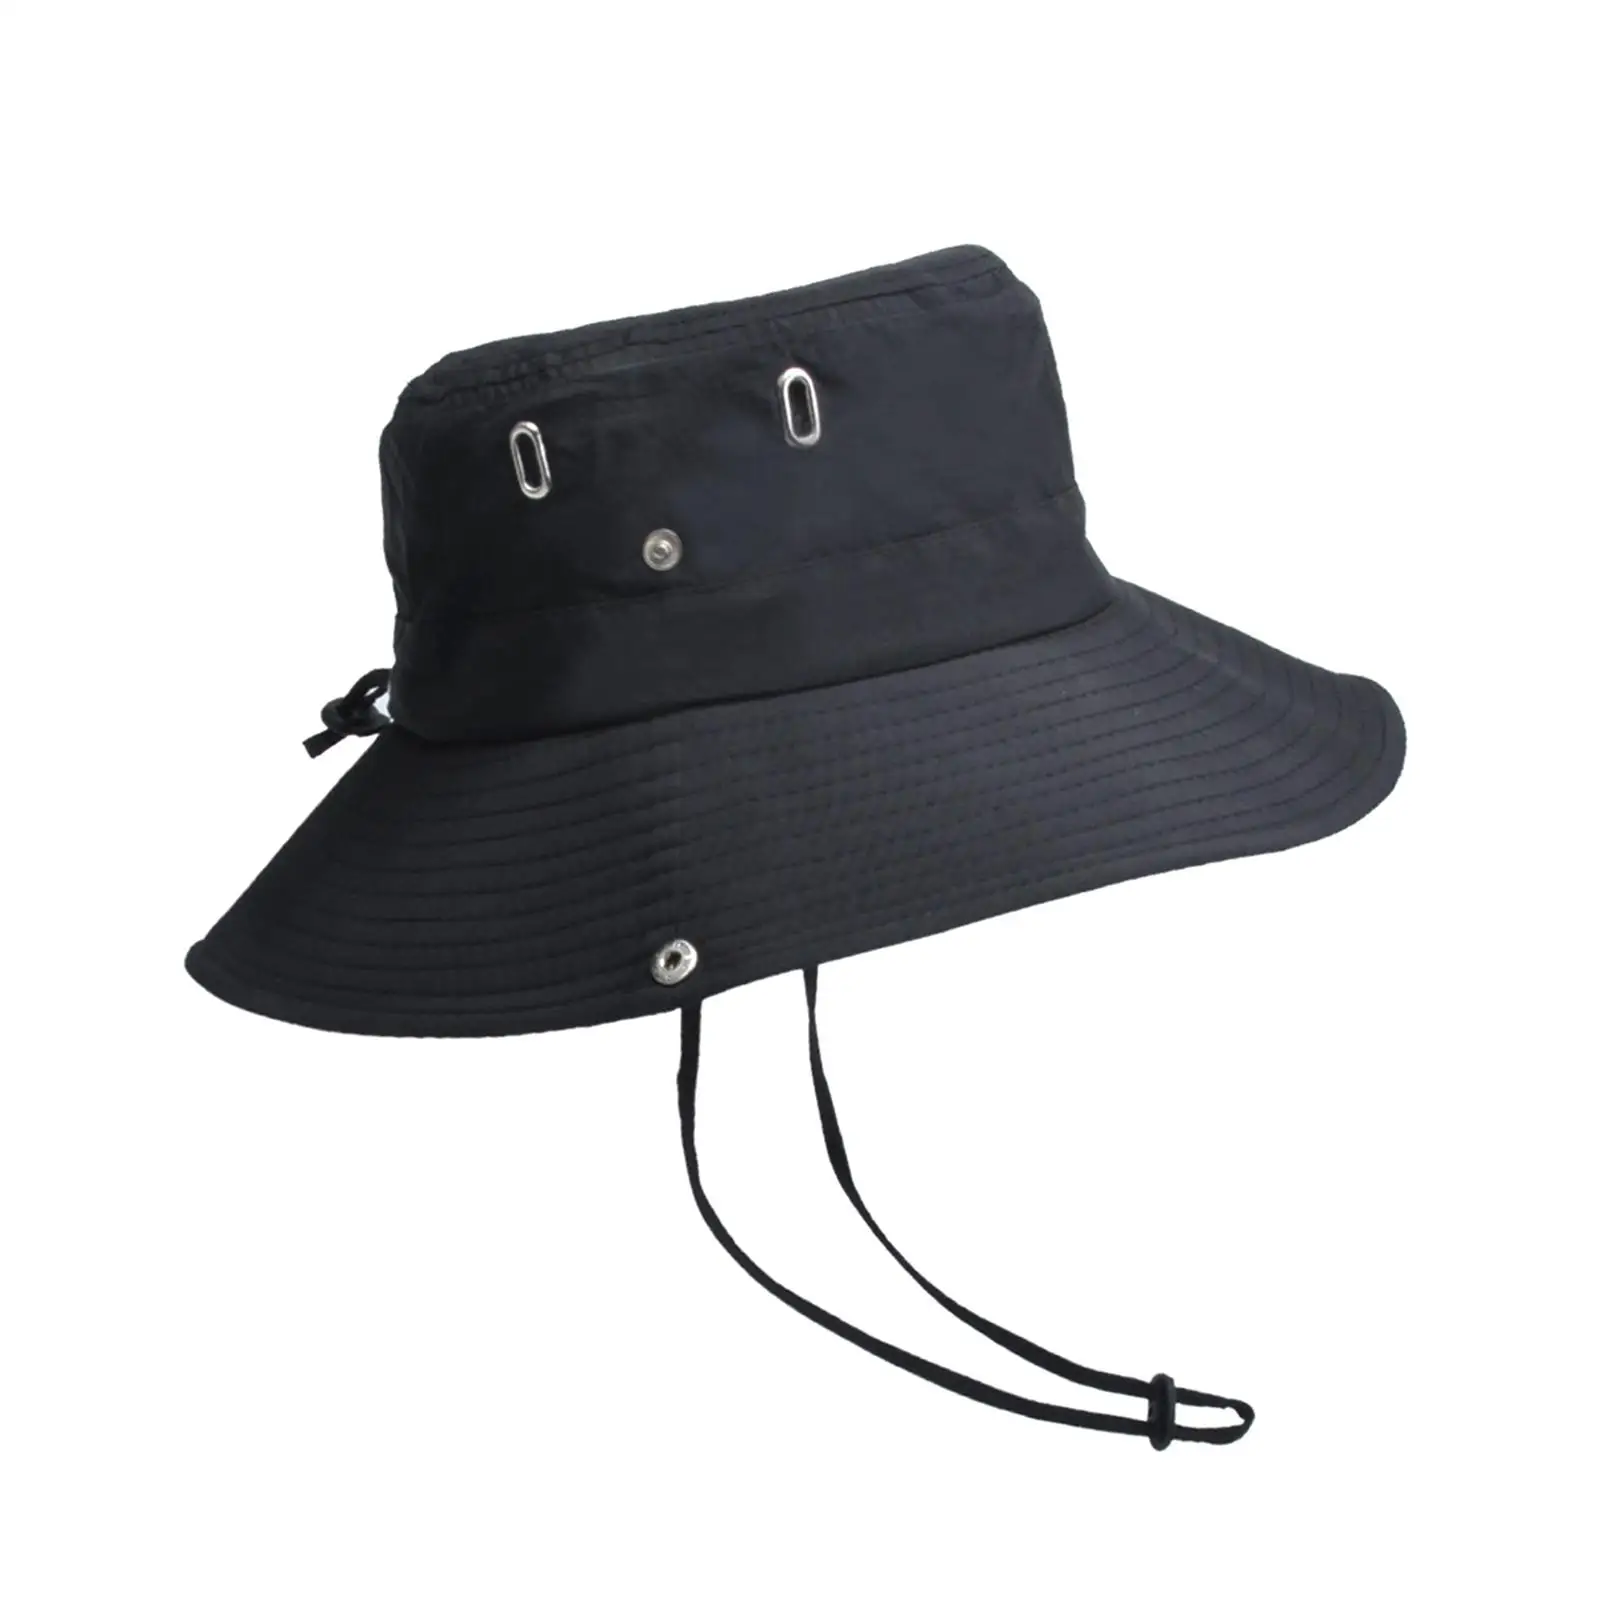 Bucket Hat Breathable Adjustable Sun Protection Sun Hats Summer Camping Caps for Fancy Dress Beach summer Sports Travel